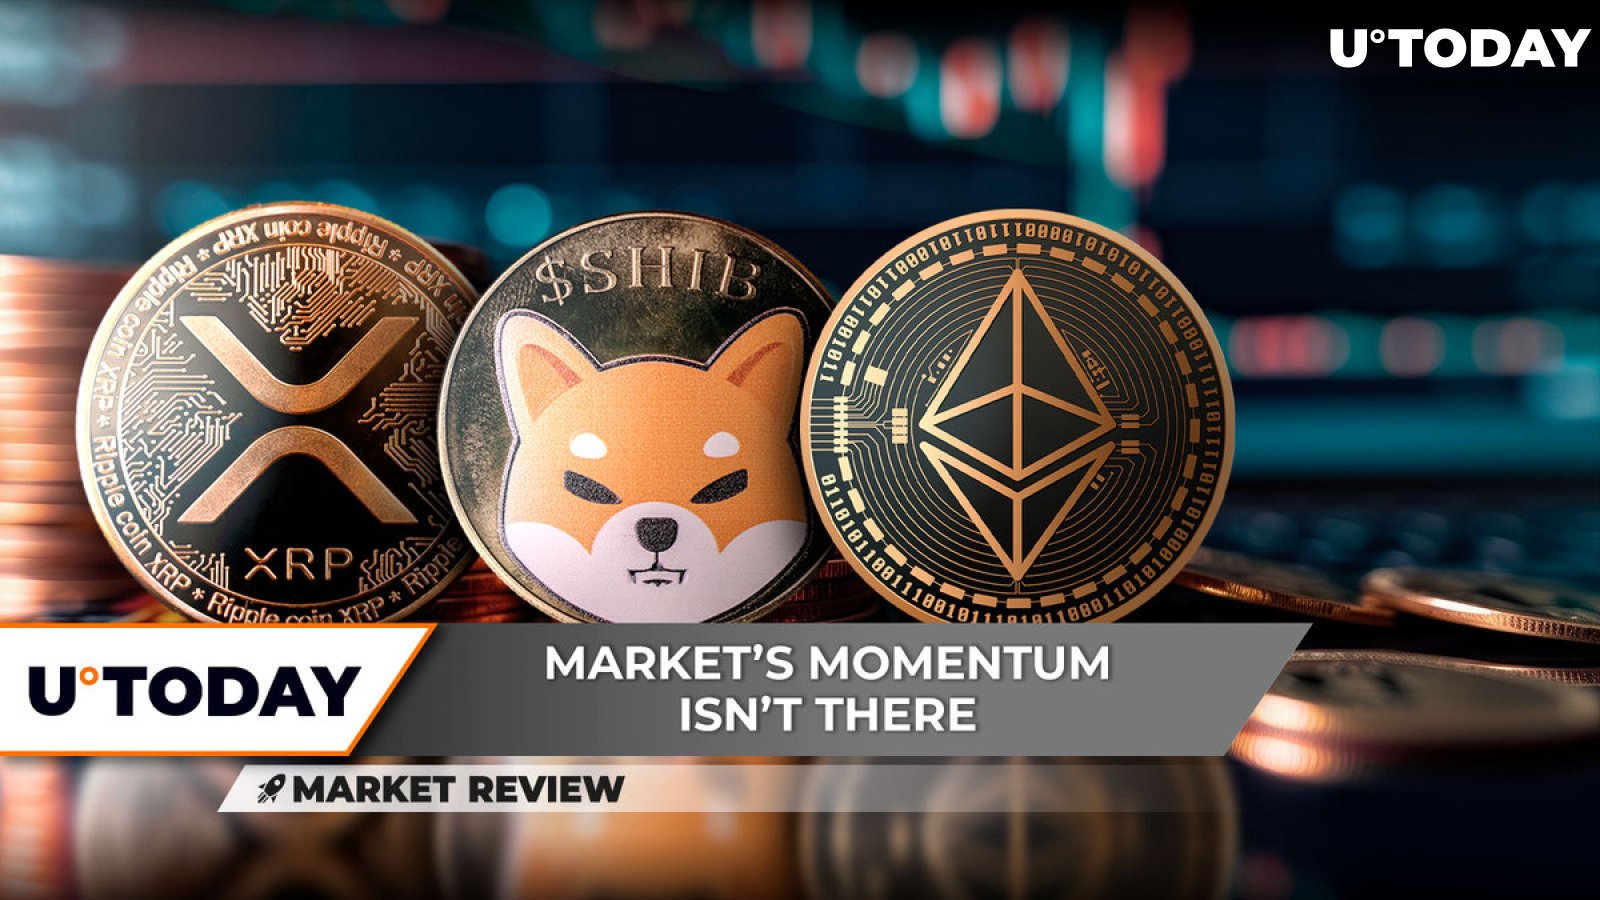 XRP on Verge of Bull Market Again? Shiba Inu (SHIB) Lifesaver Support Is Here, Ethereum (ETH) Wants $4,000 Badly